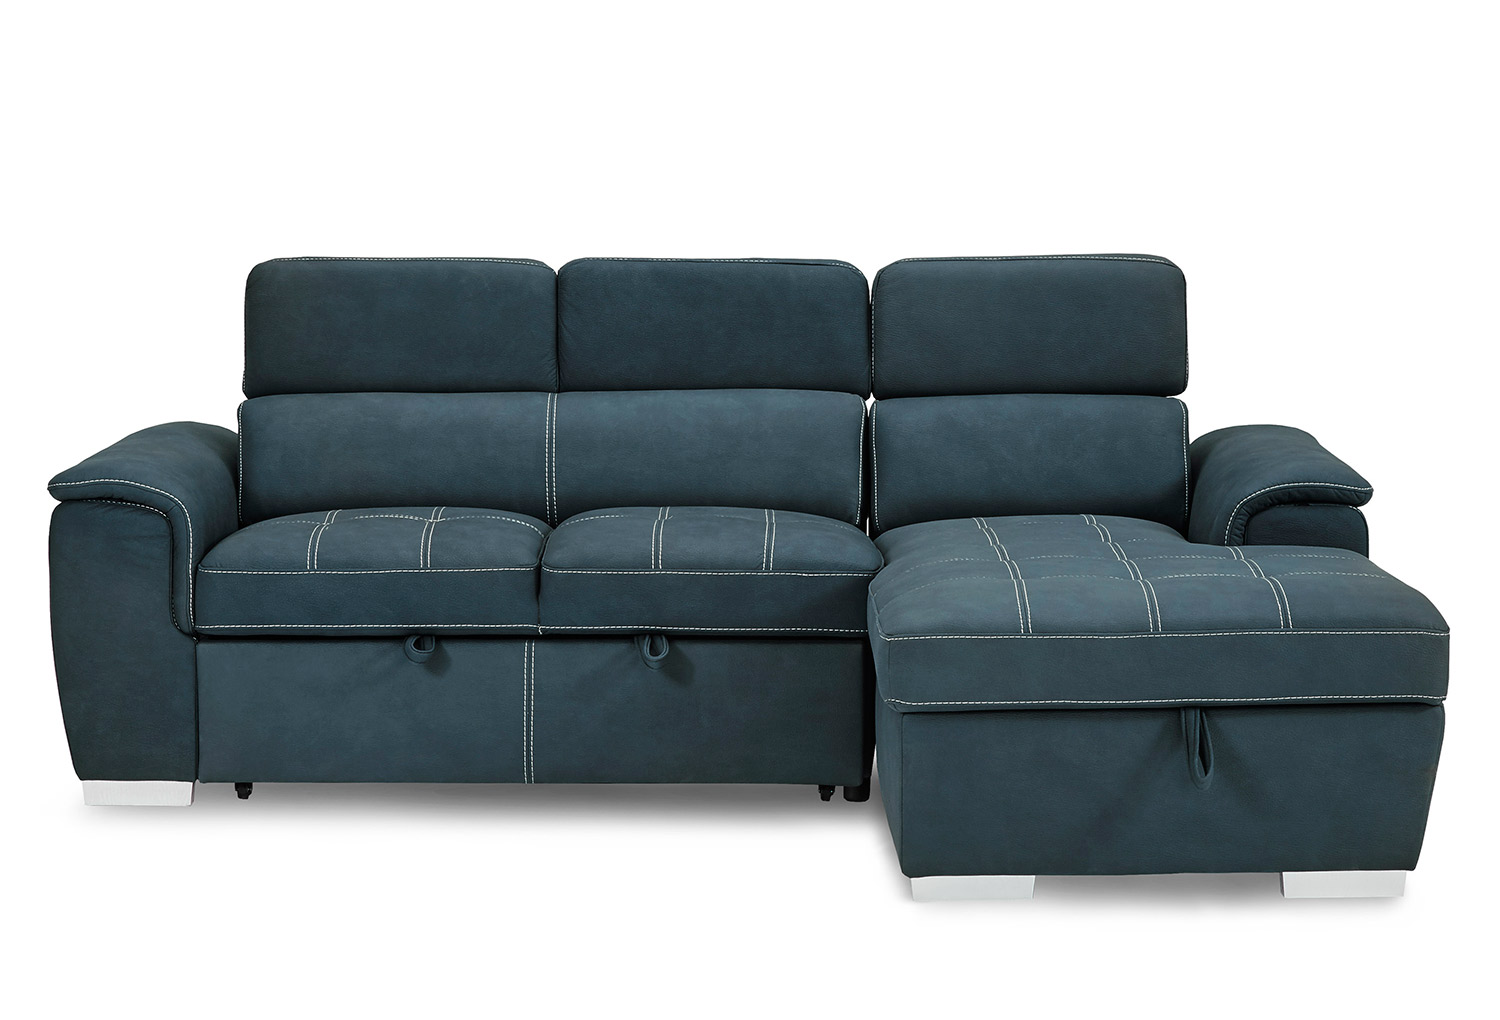 Homelegance Ferriday Sectional with Pull-out Bed and Hidden Storage Set - Blue